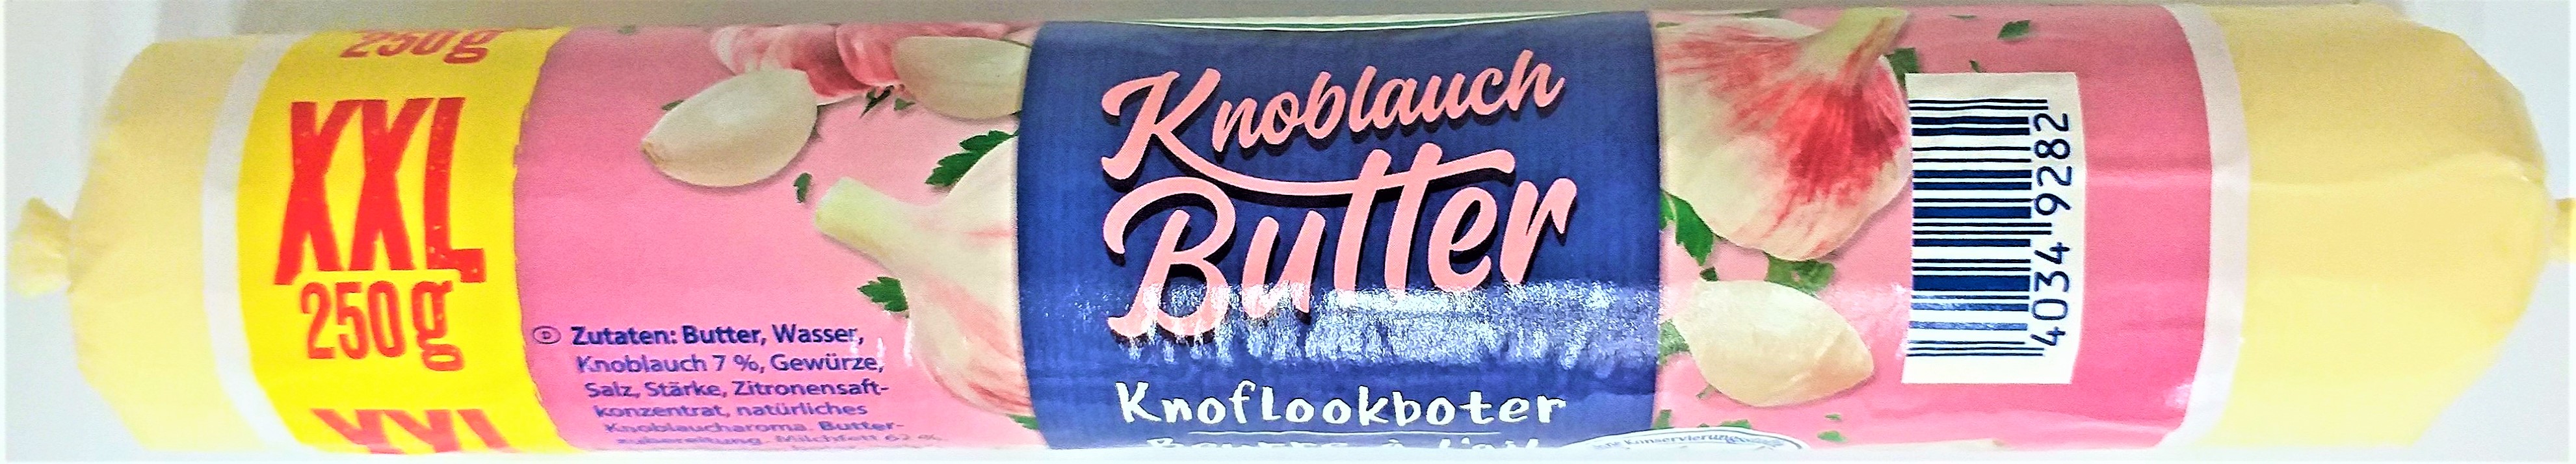 Meggle Knoblauch Butter Rolle XXL 250g